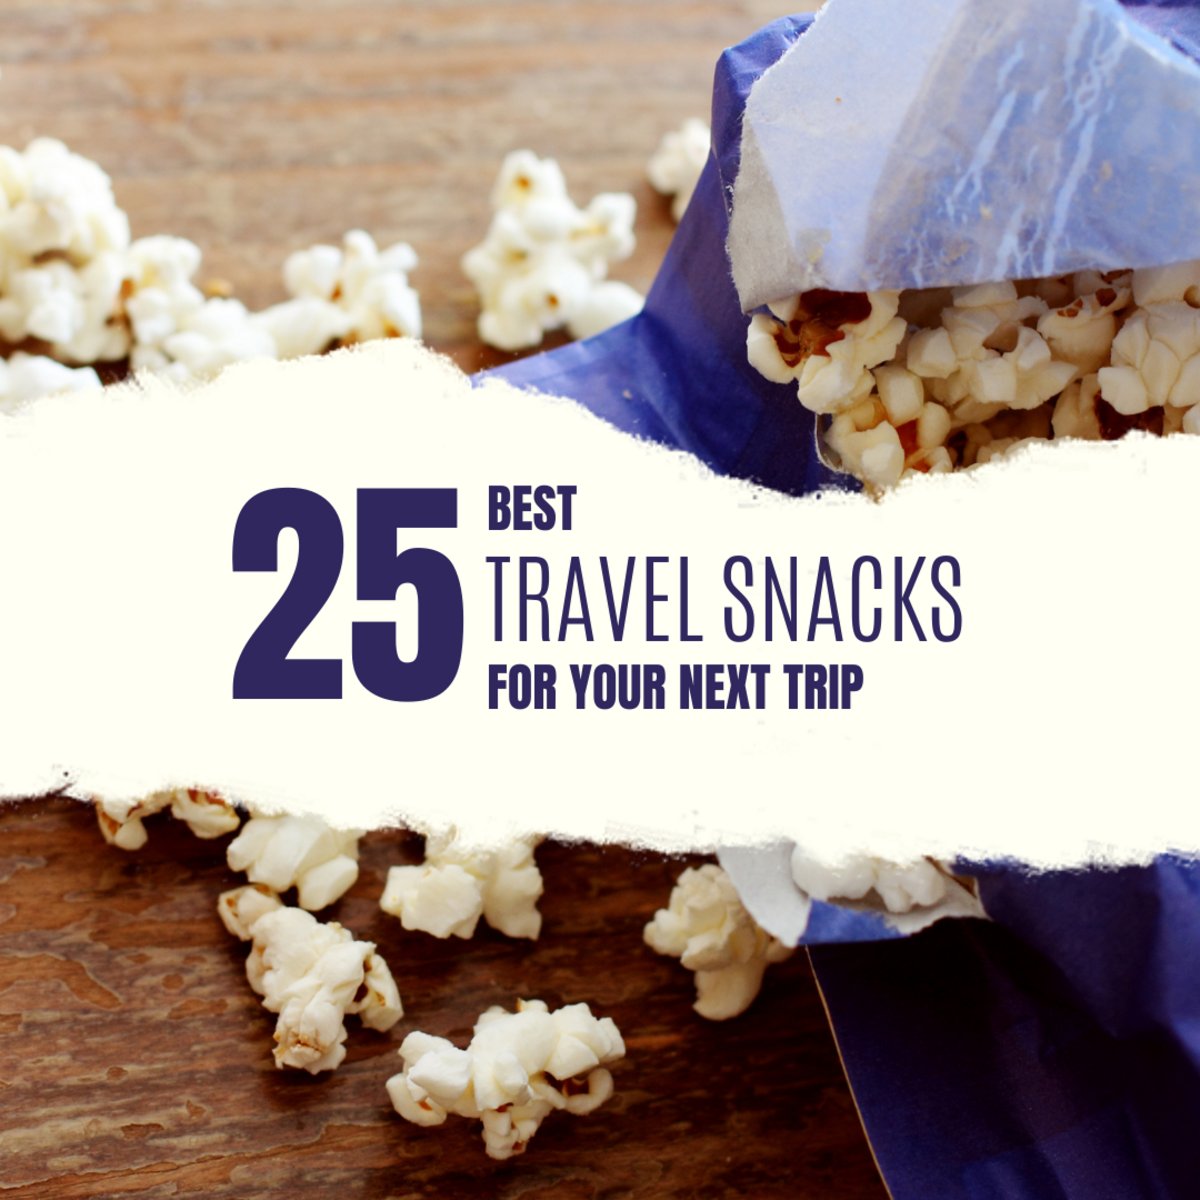 Nobody wants a hangry traveler! Check out this list by #GoodHousekeeping on some nutritious #snacks that will keep you fueled for the journey ahead to Pensacola. See you soon! 😋 bit.ly/3TaDZR5 #travel